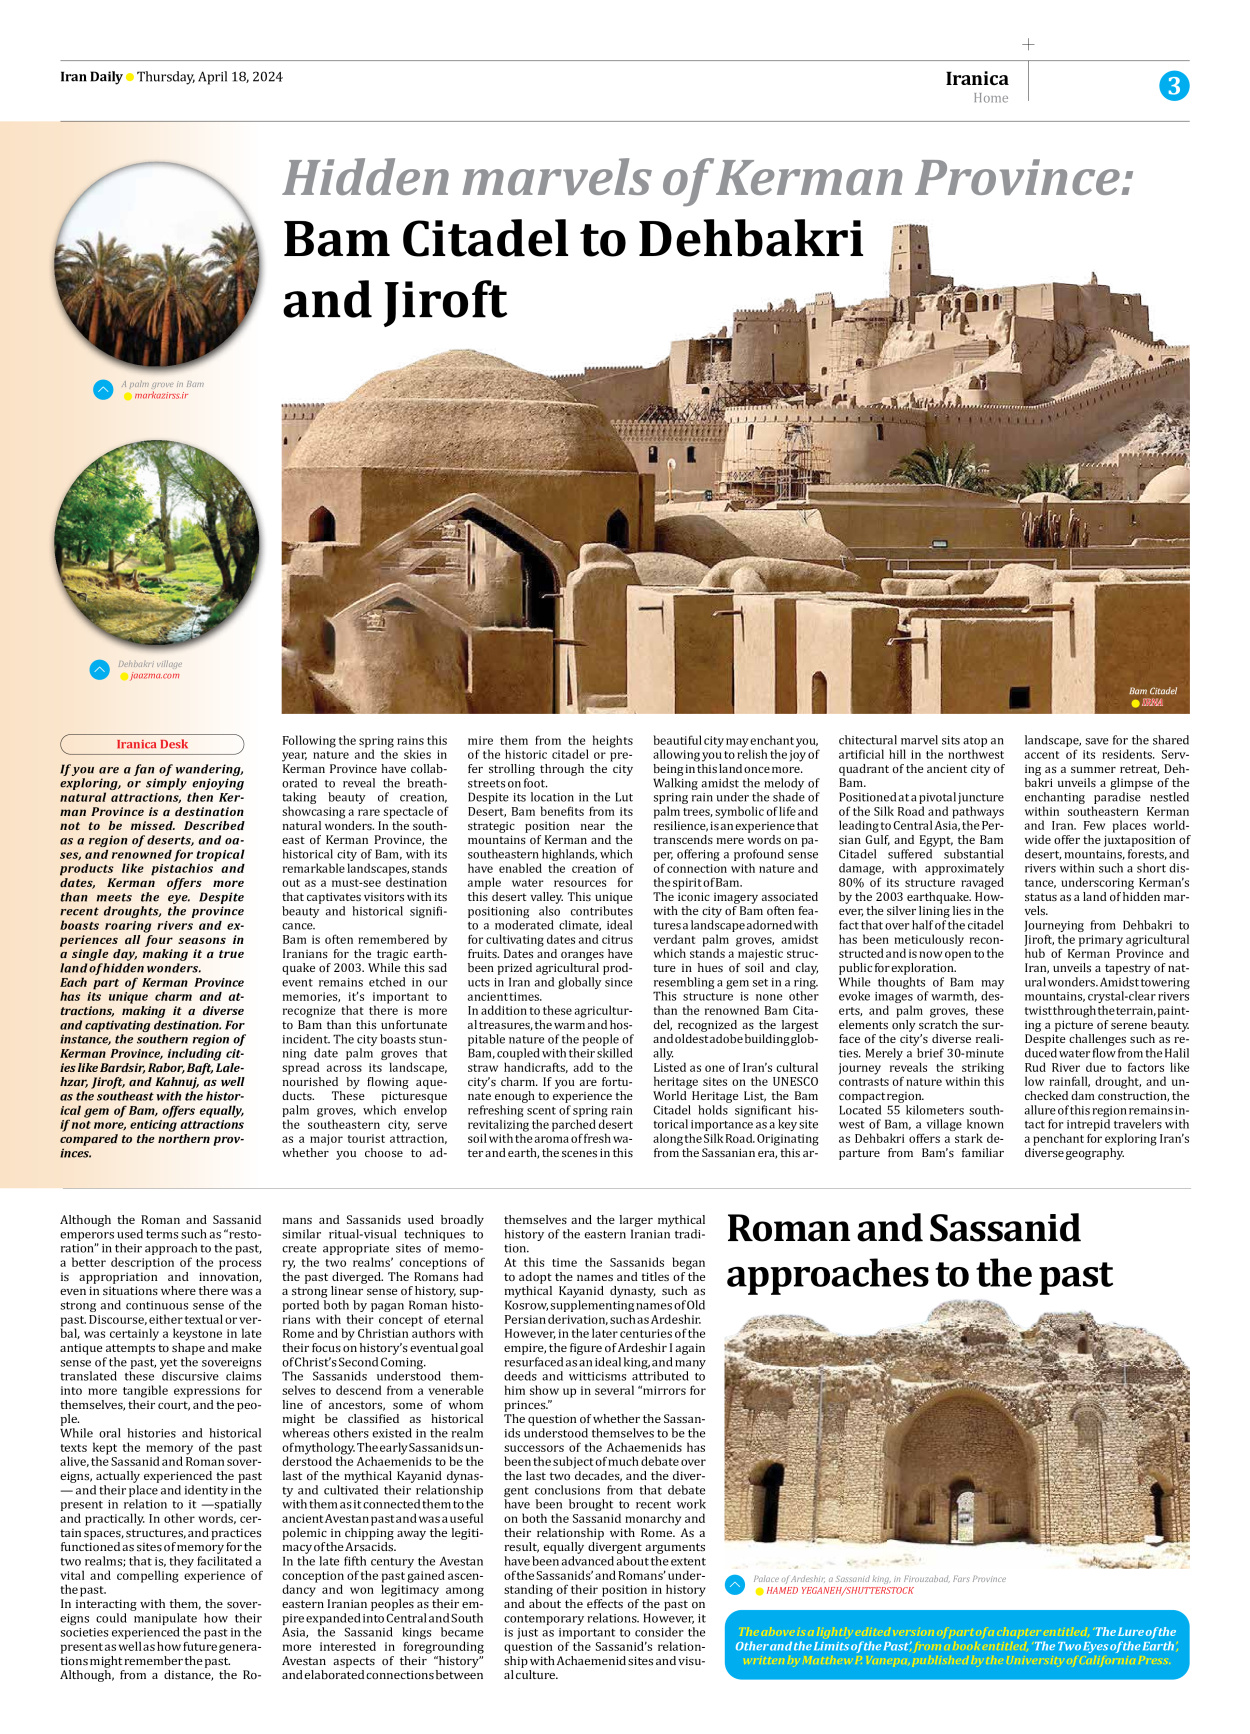 Iran Daily - Number Seven Thousand Five Hundred and Thirty Six - 18 April 2024 - Page 3